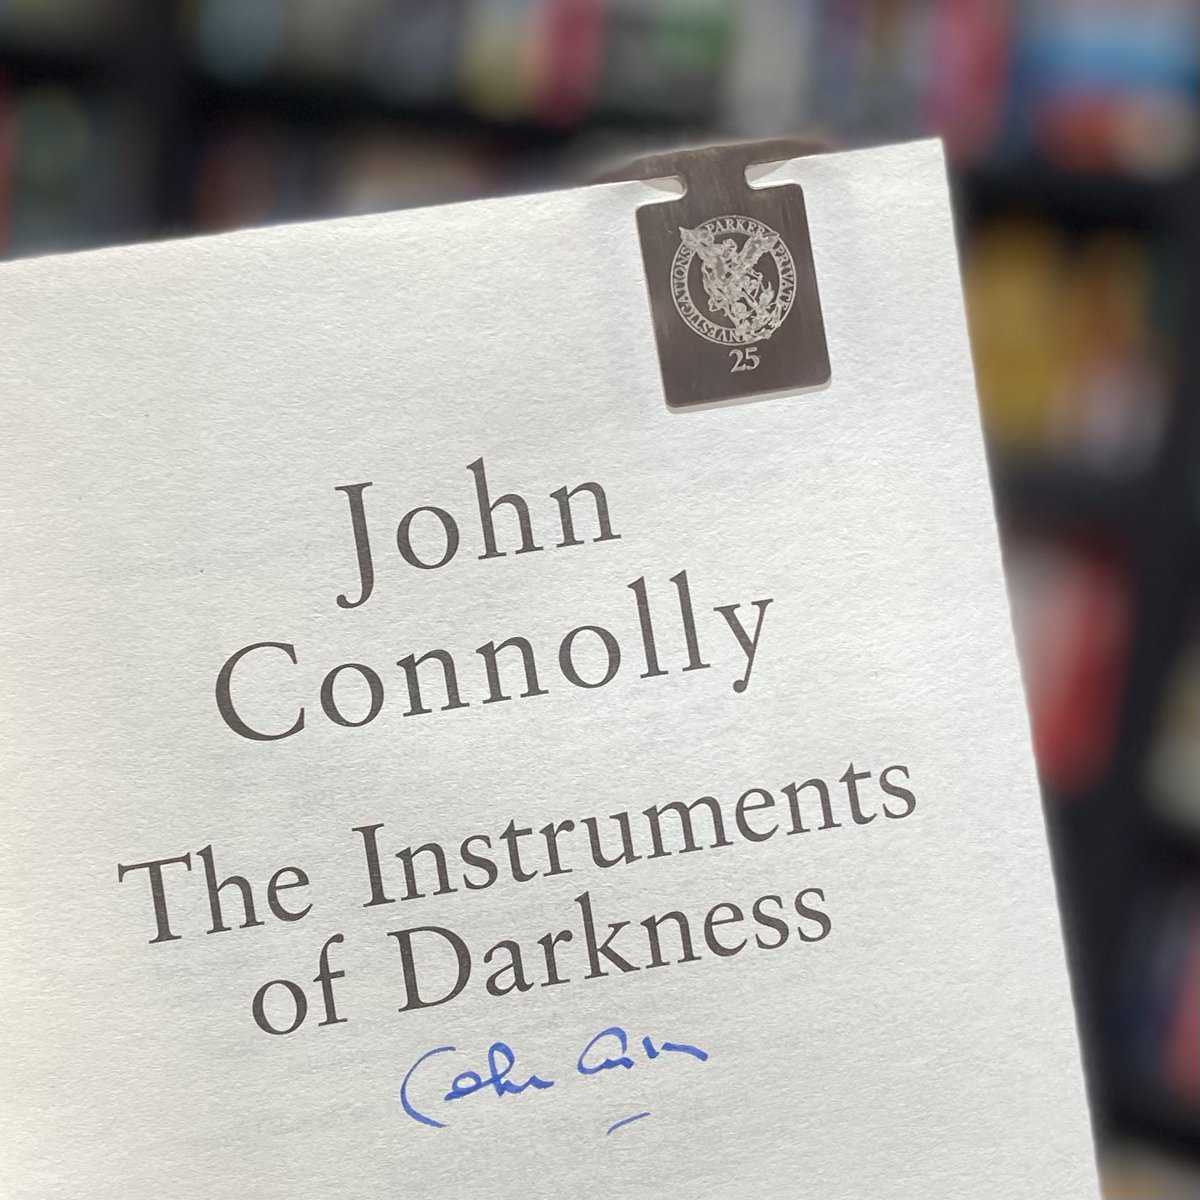 A massive thank you to @jconnollybooks for visiting us today to greet some very excited readers! We now have plenty of signed stock in store for our crime and fantasy bookworms, as well as these gorgeous metal bookmarks to celebrate 25 years of the Charlie Parker series!